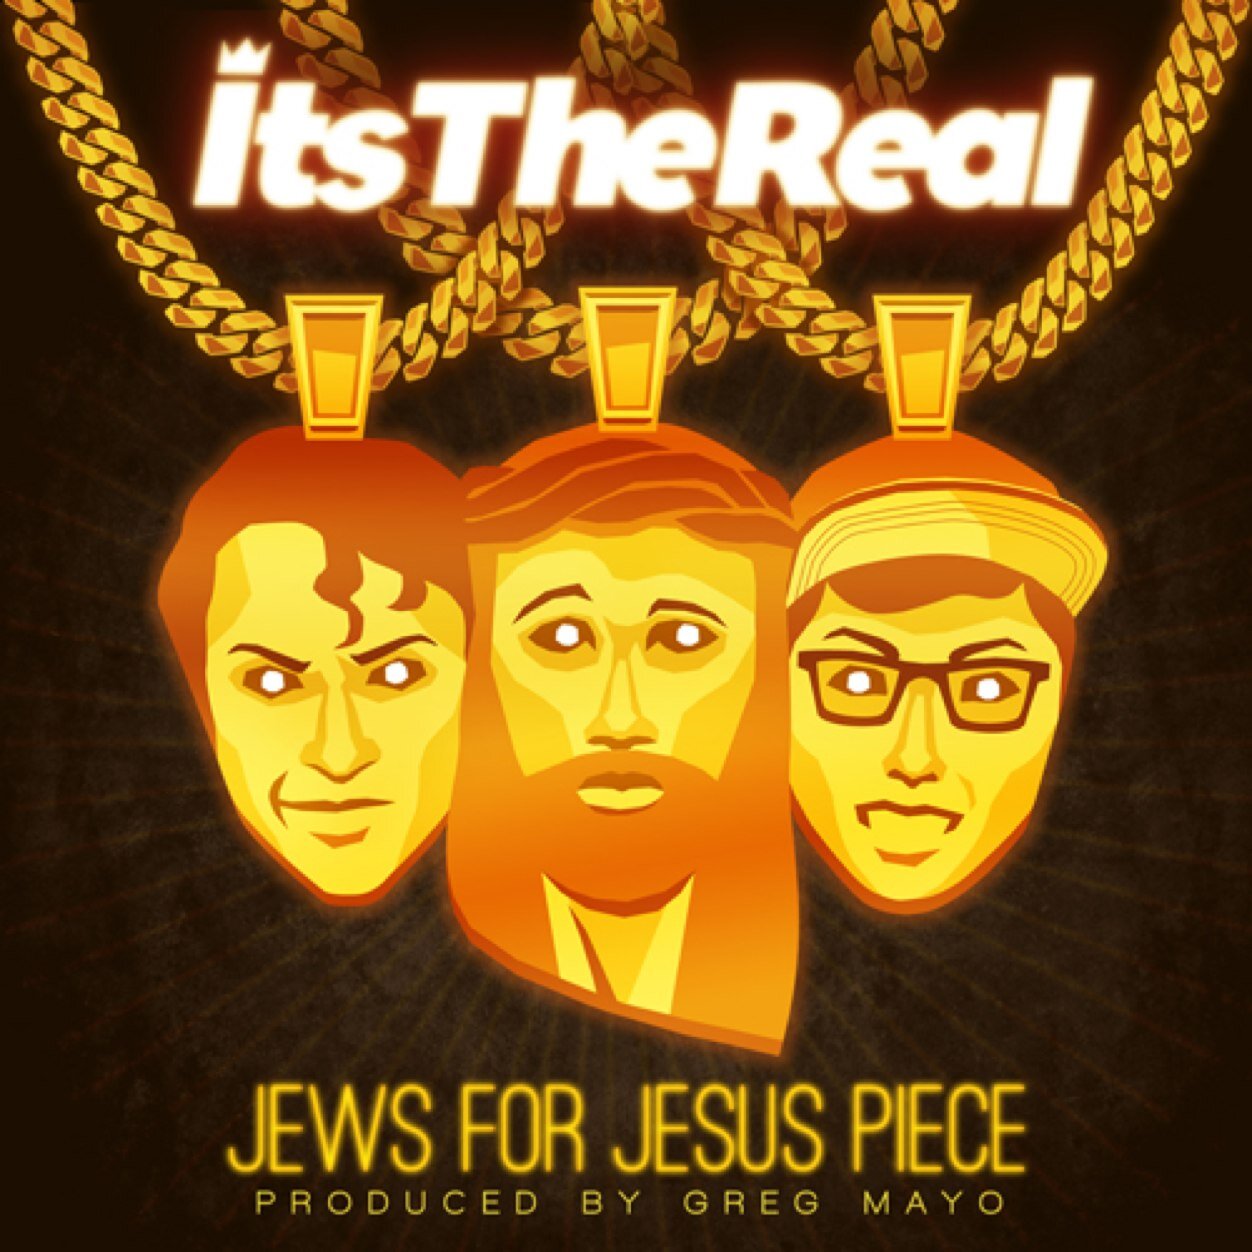 ItsTheReal "Jews For Jesus Piece" Video | @itsthereal 